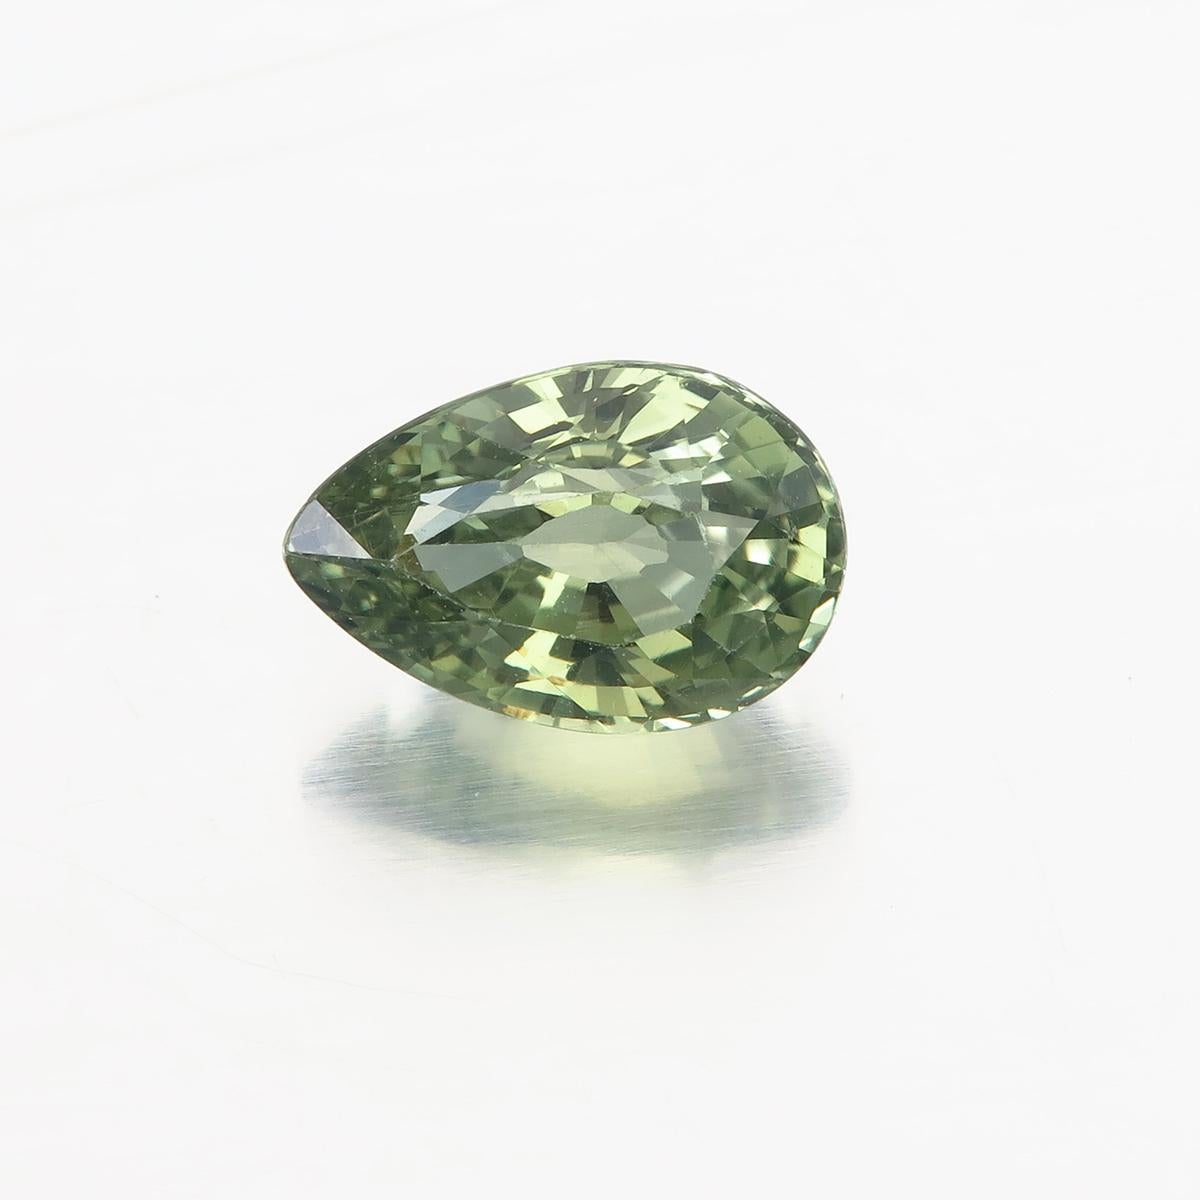 1.48 carat Yellowish Green Sapphire from Madagascar Lotus certified
Cutting style: Pear Faceted brilliant
Dimensions: 8.52 x 5.62 x 3.89 mm
Weight: 1.48 carat
No Heat
Lotus certificate report number: 8987-1600